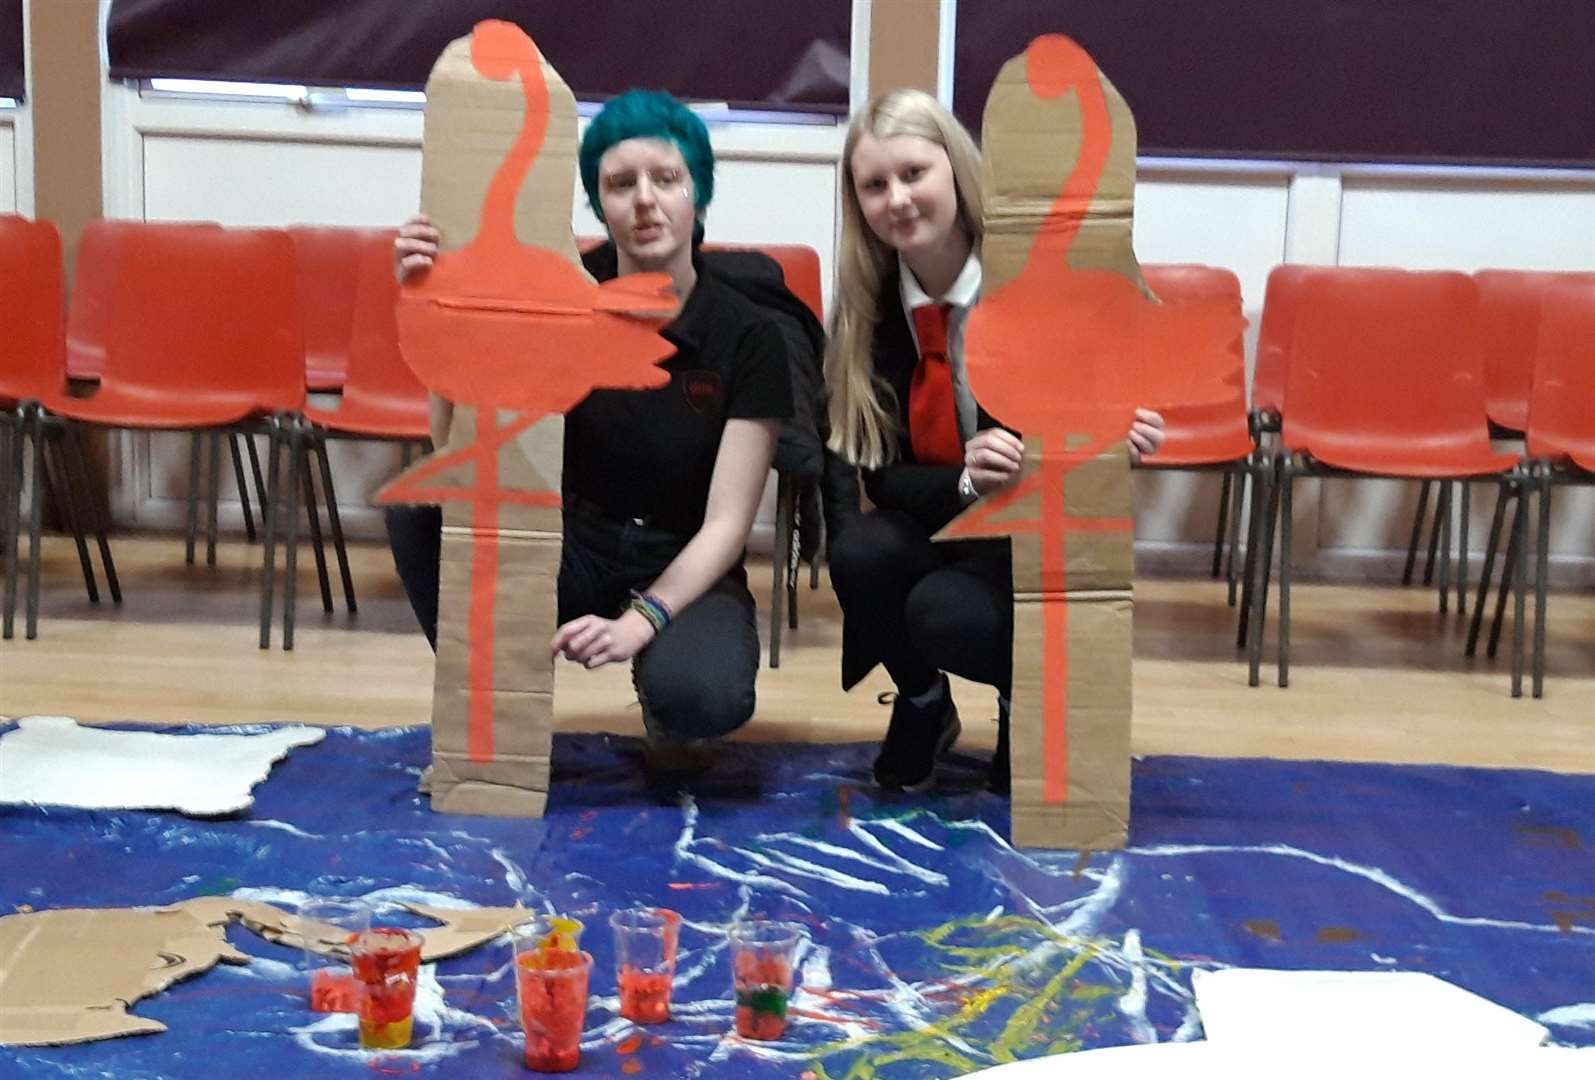 Making cardboard flamingoes for the croquet scene are Ally Oglesby (left), and Chelsi Mowat, both Golspie.